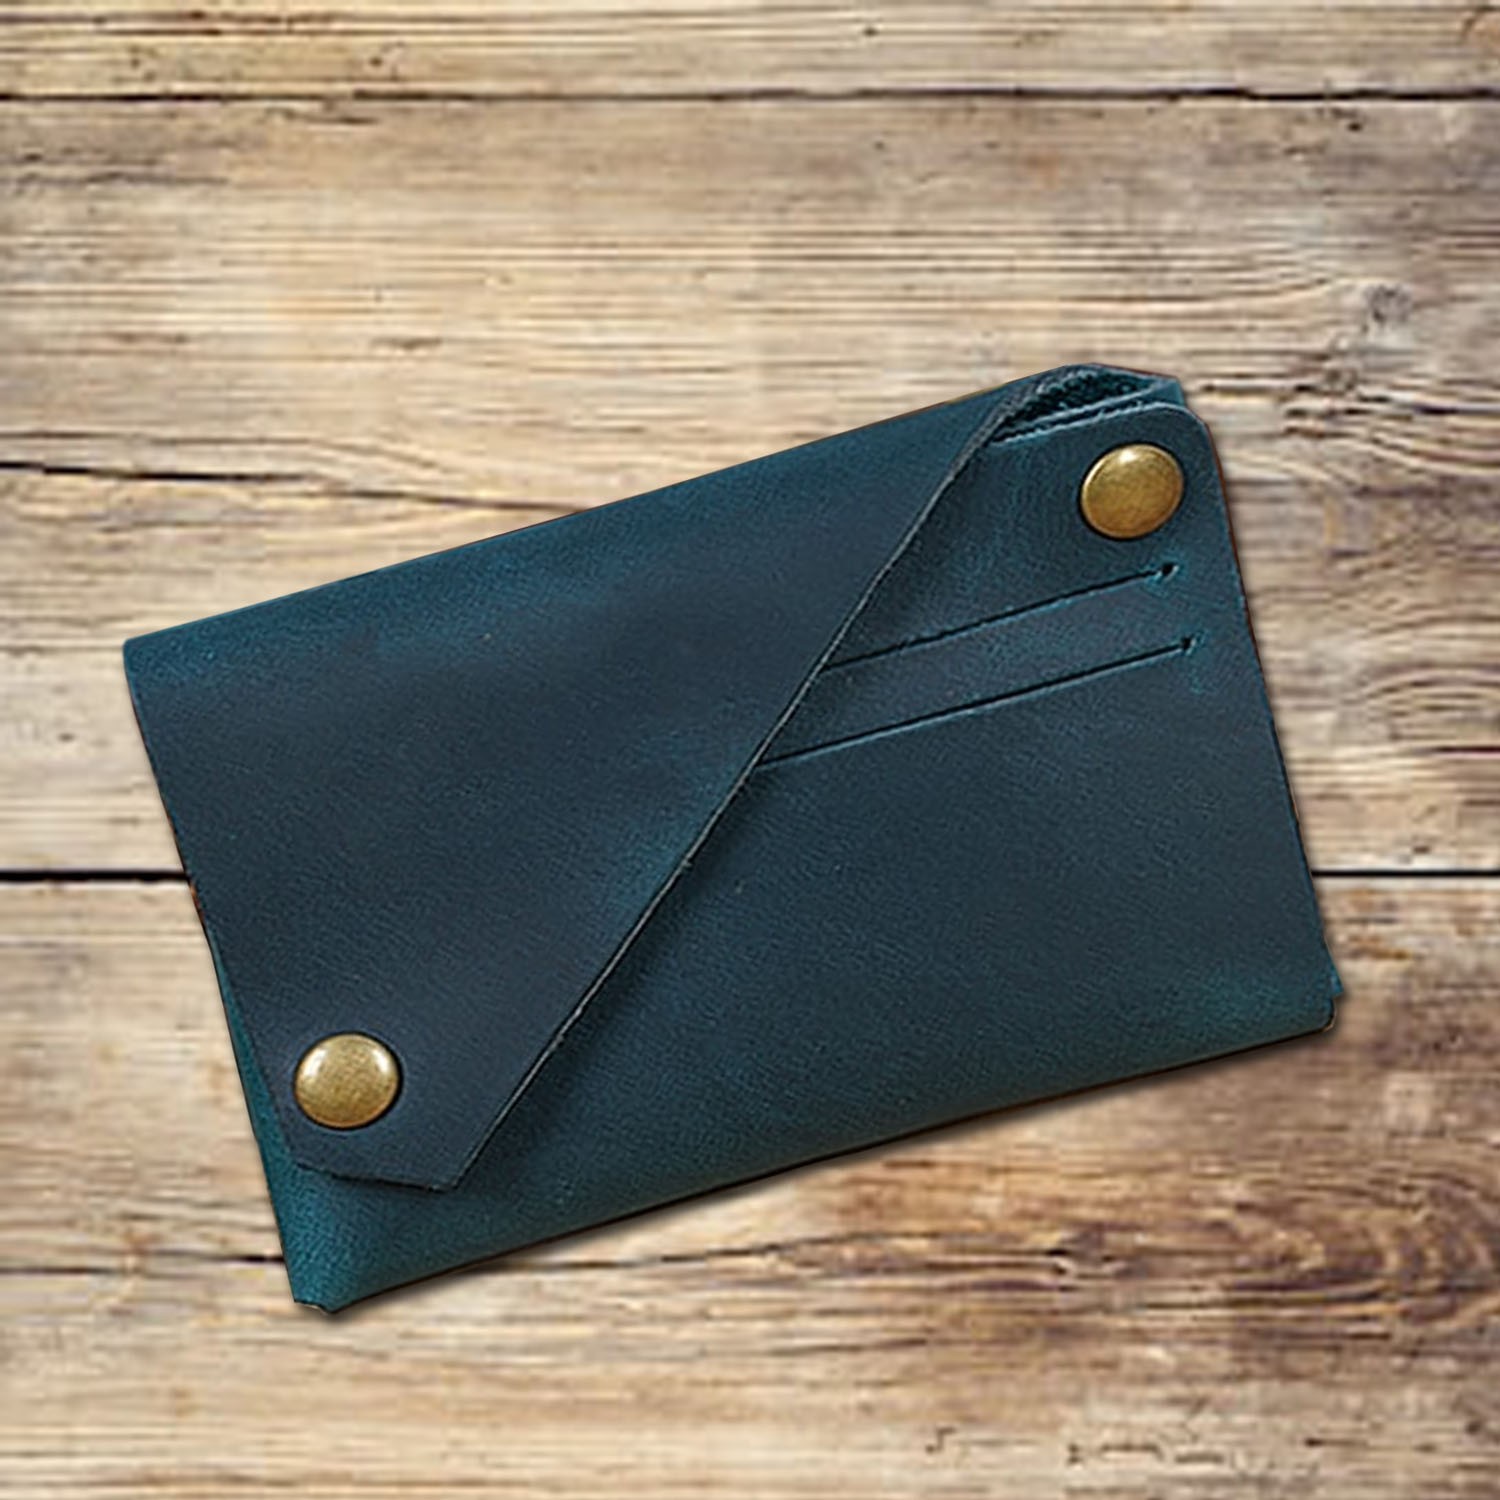 Handmade folded light brown leather card wallet